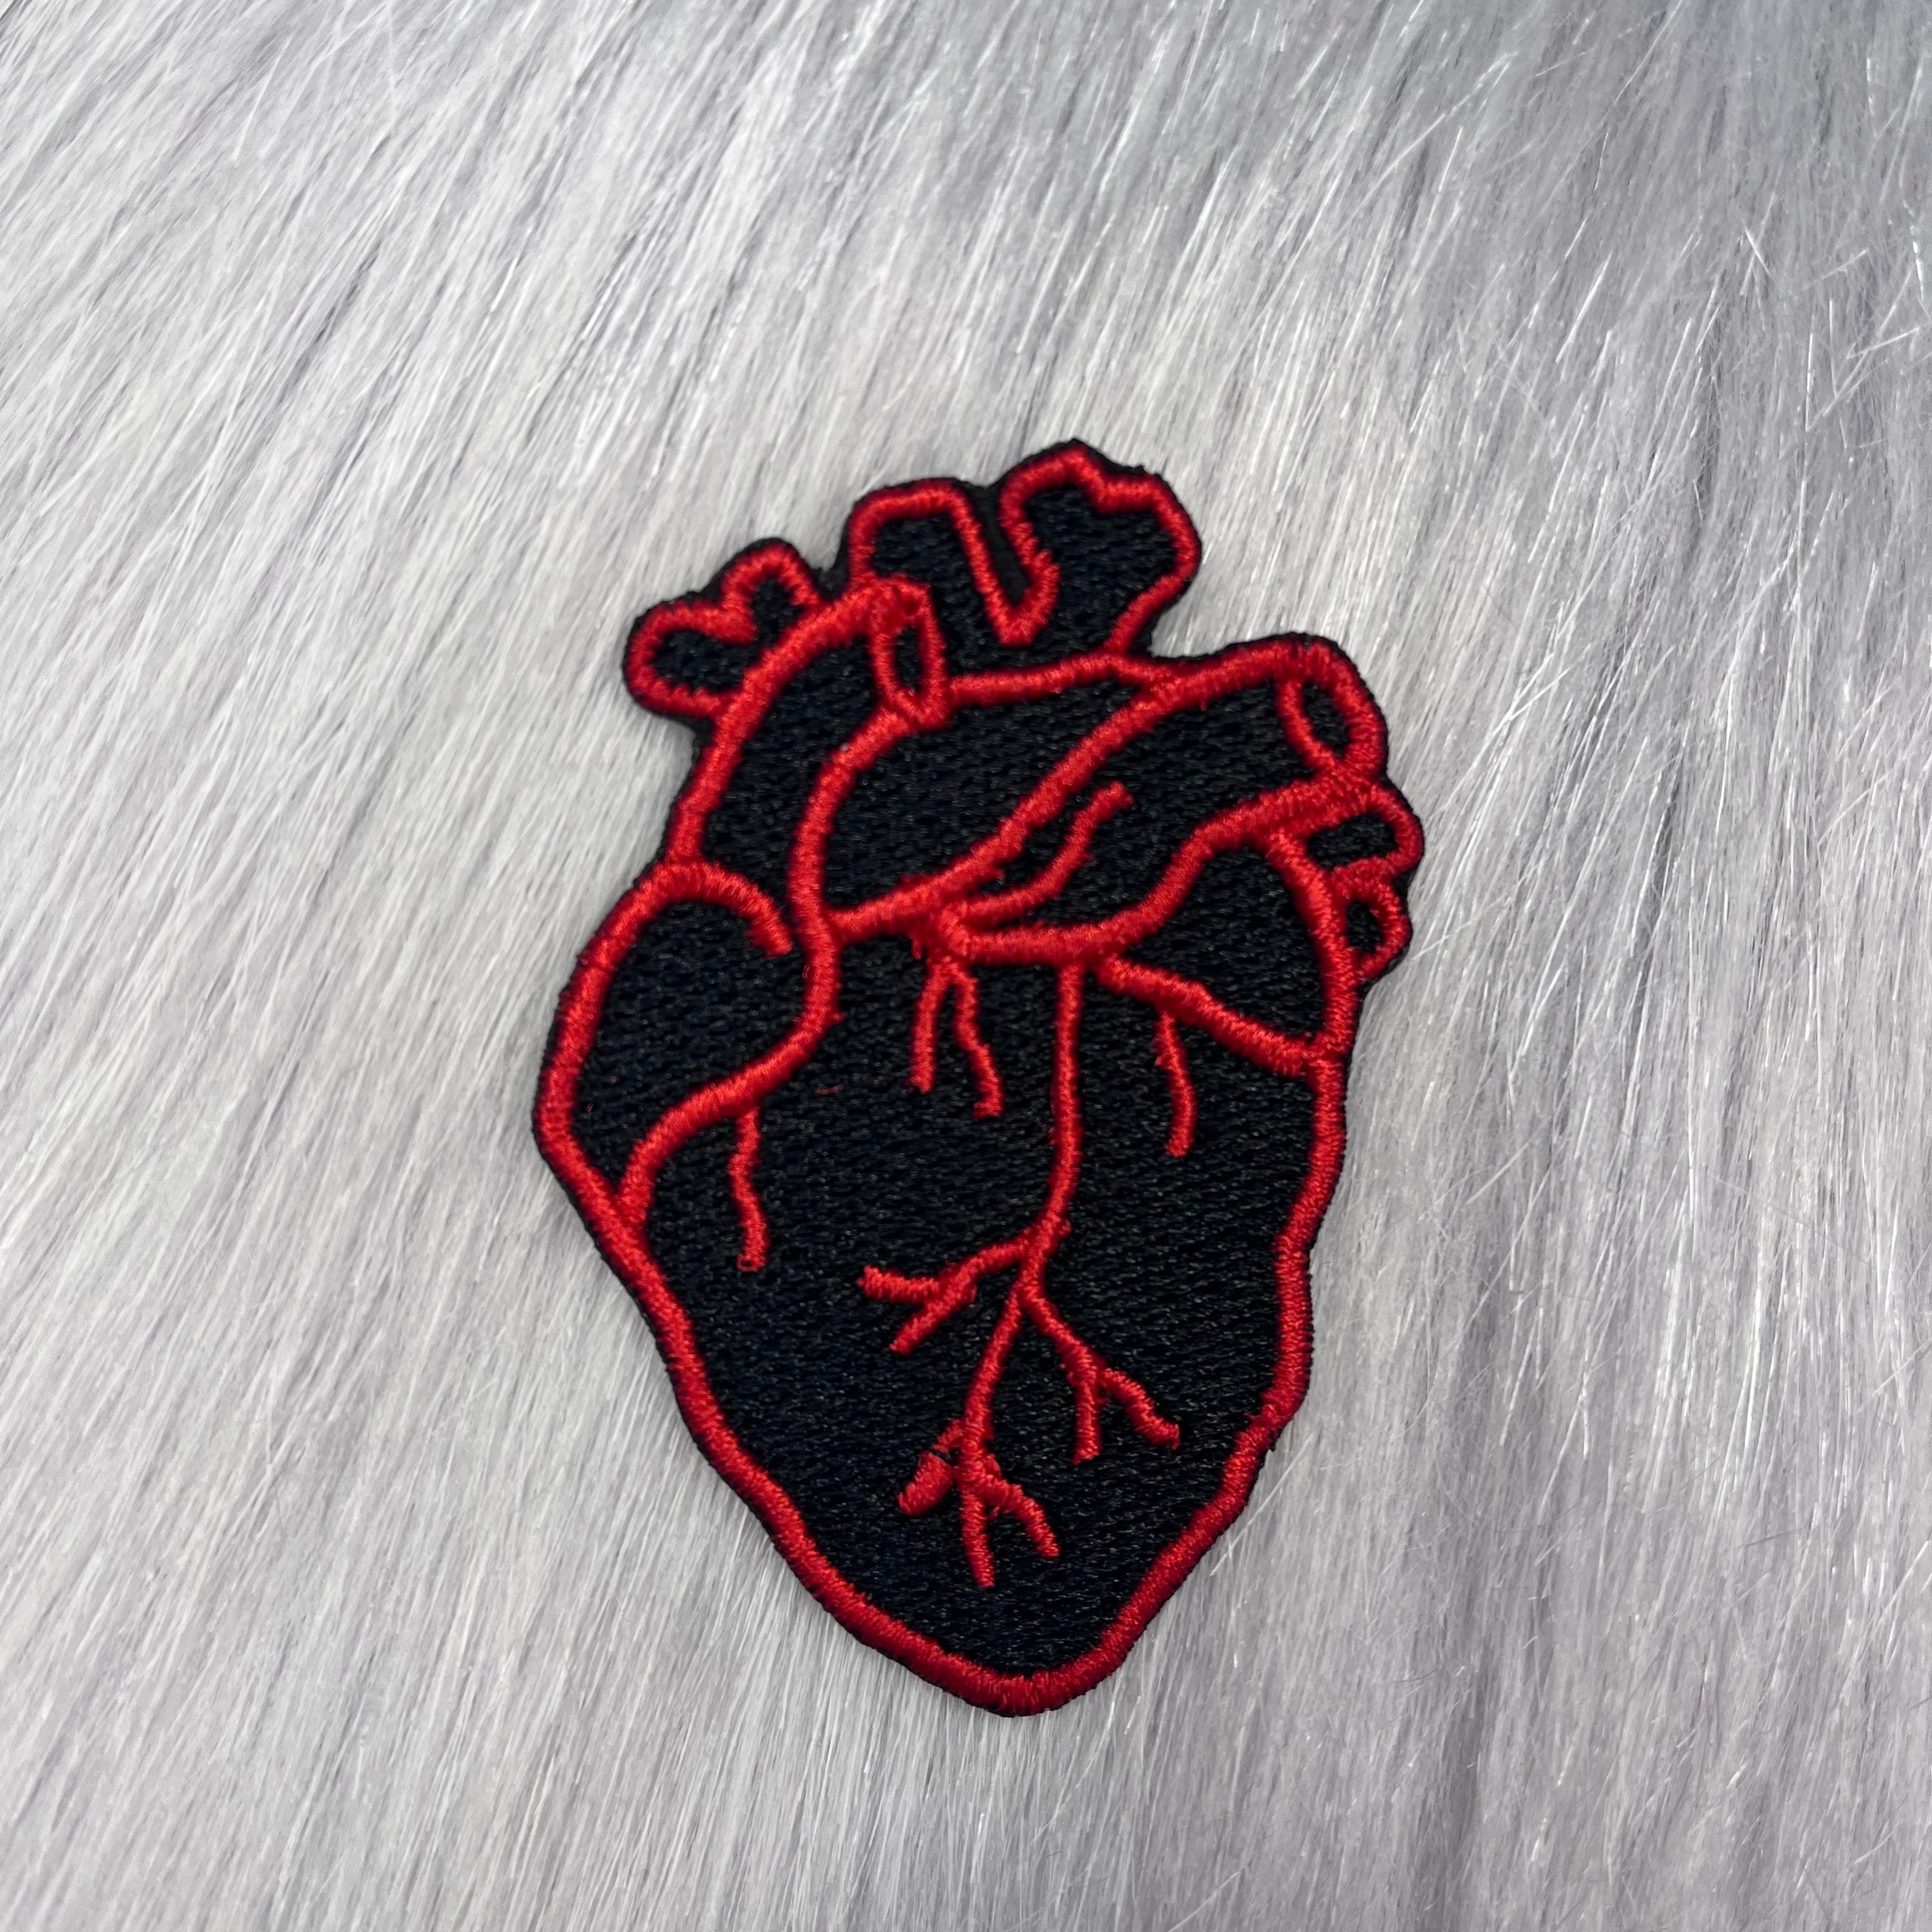 Van Gogh Heart Embroidery Patch Applique DIY Anatomical Heart Iron on  Patches for Clothing Sticker Wave Patches on Clothes Badge